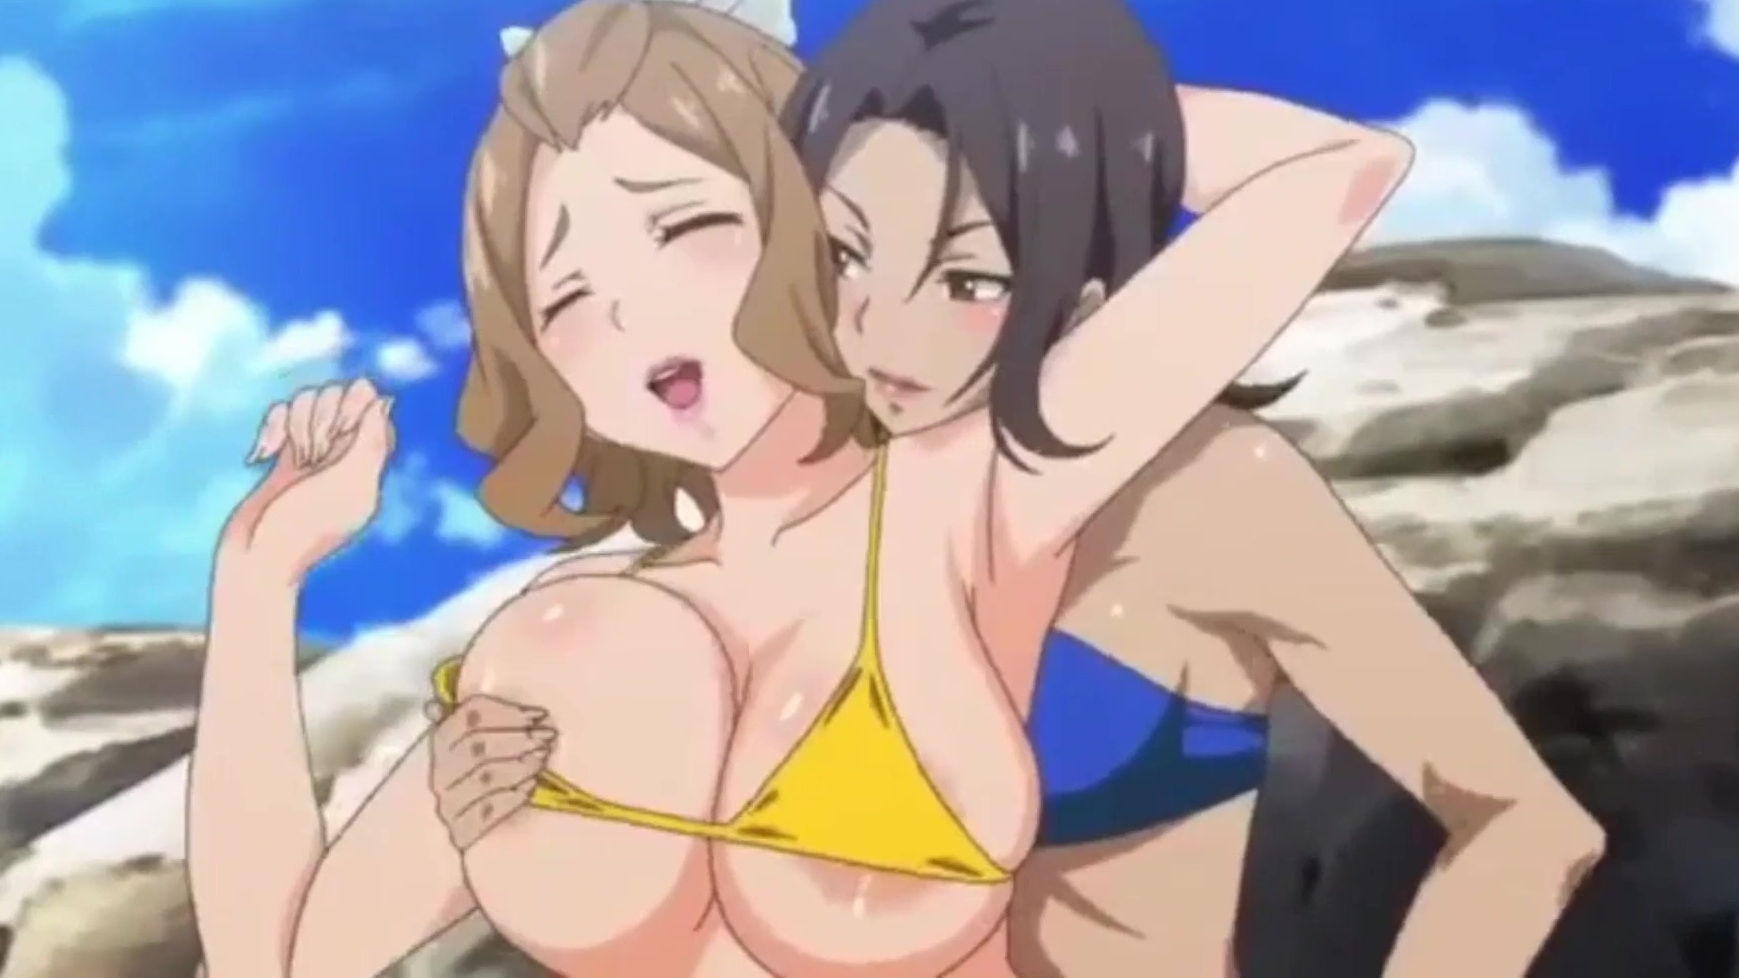 Oily Hentai Tits - Hentai Compilation of Busty, Tits-crazy, Lesbian Valkyries